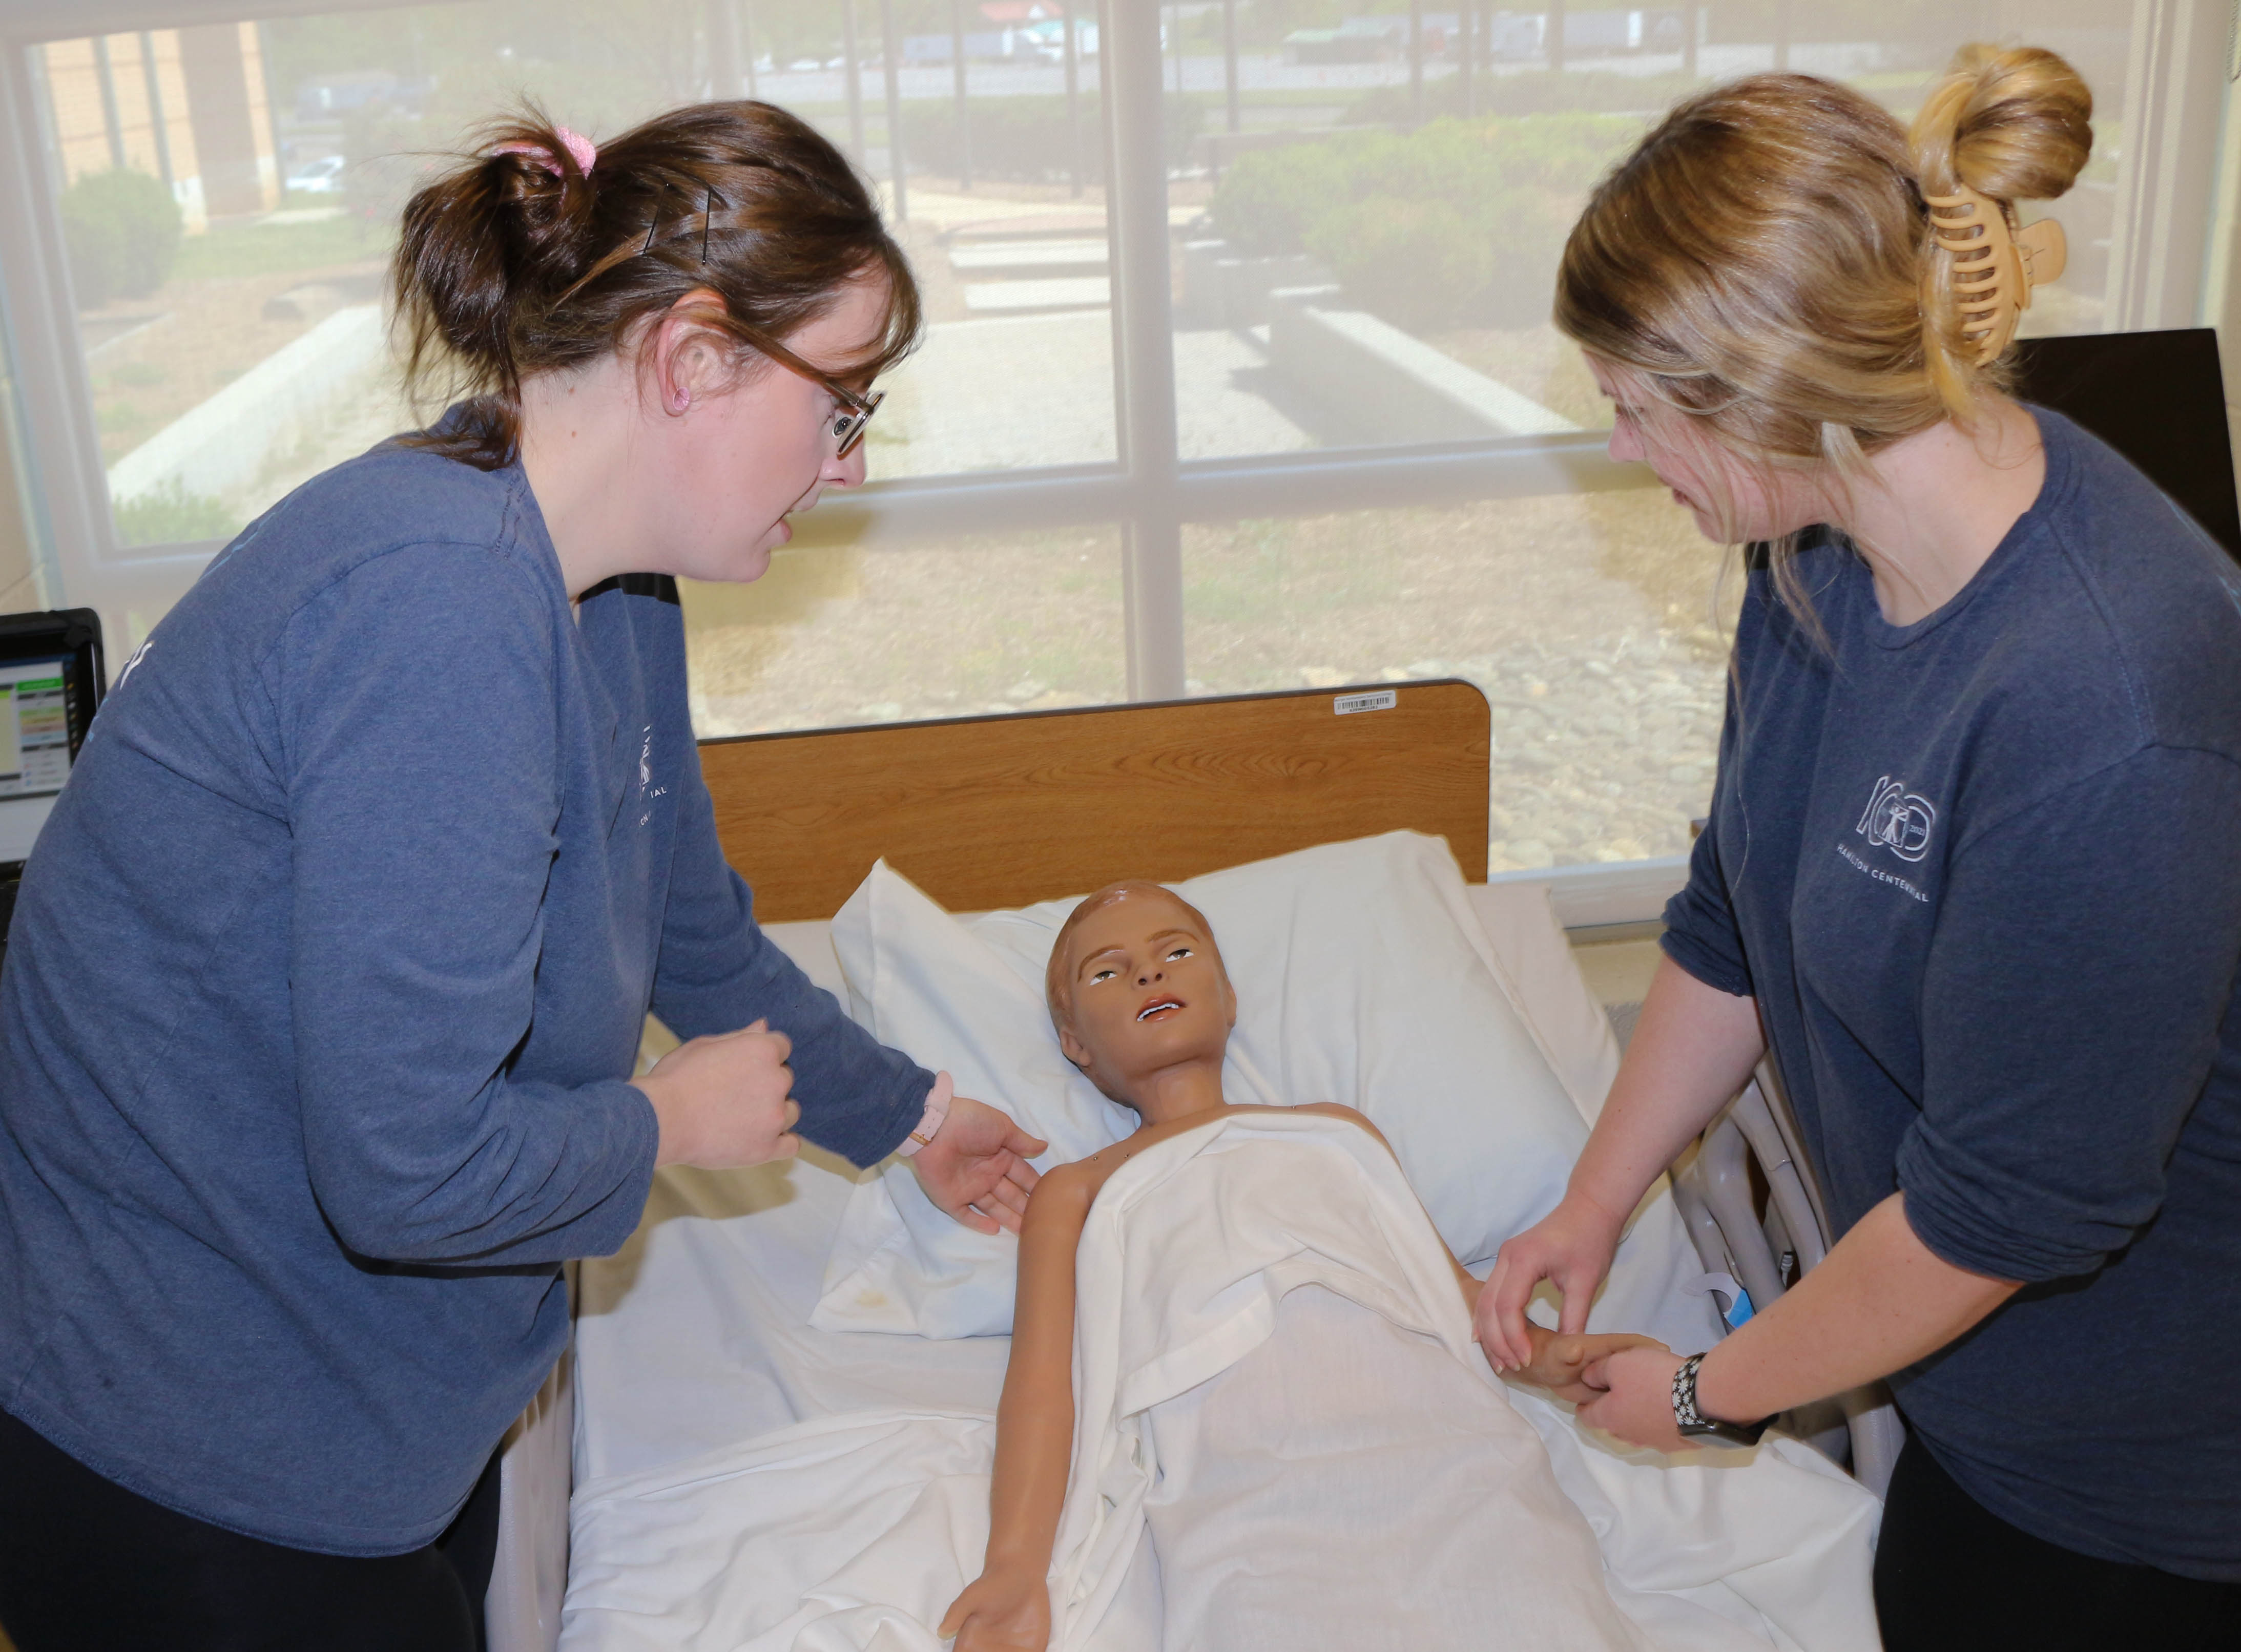 Practical Nursing students Jacob Jackson (left) and Abbie Smith treat a manikin of a young boy as he simulates a seizure. Both students attend GNTC’s Floyd County Campus.